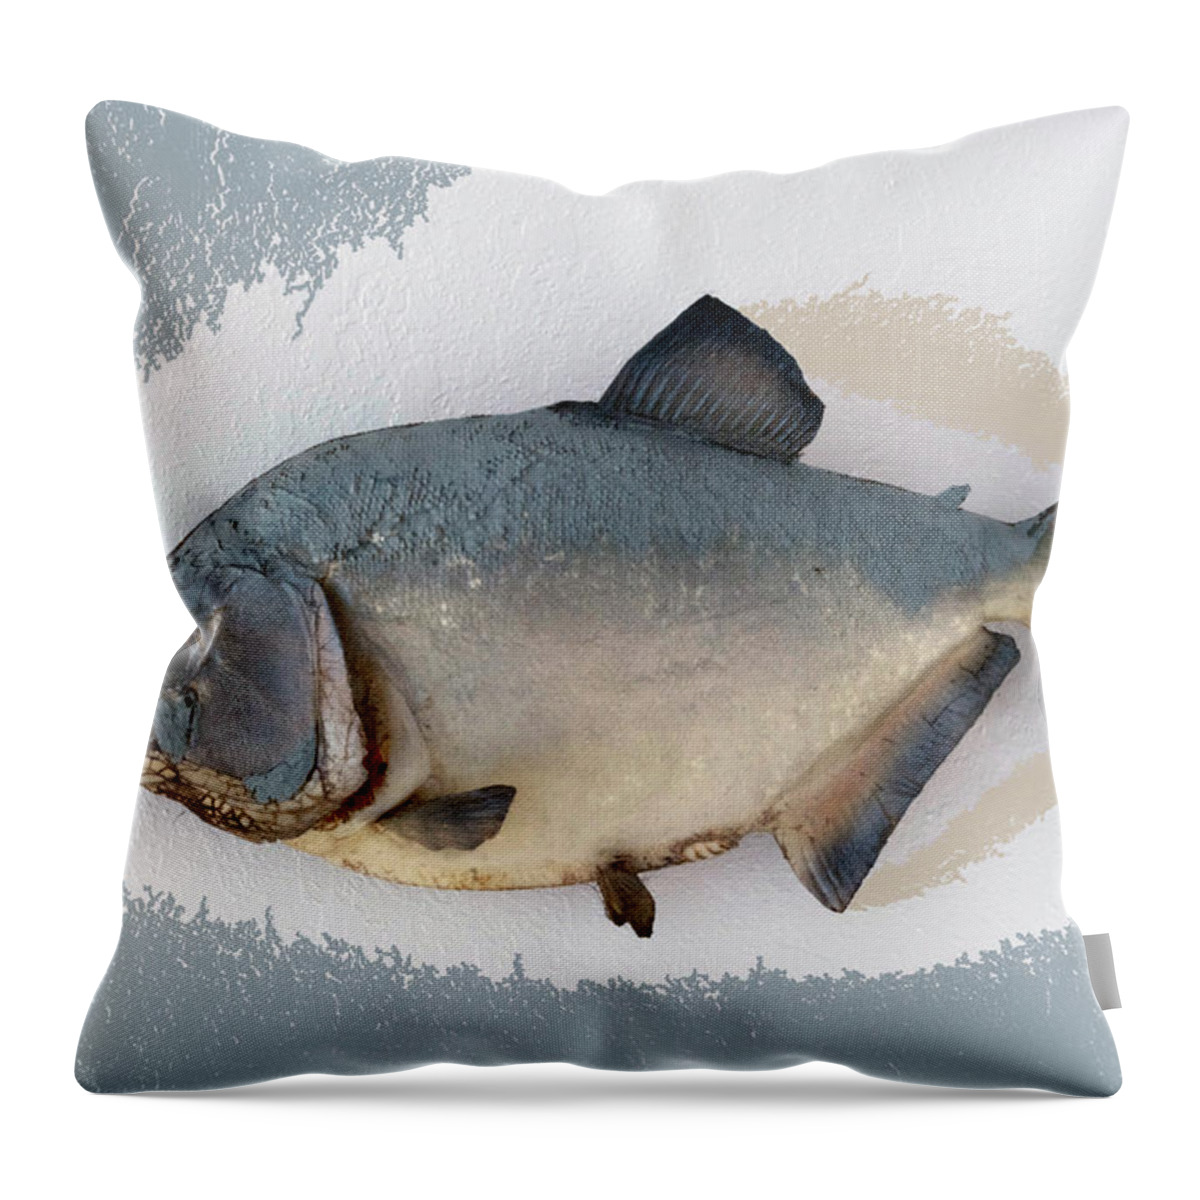 Animals Throw Pillow featuring the photograph Fish Mount Set 04 B by Thomas Woolworth